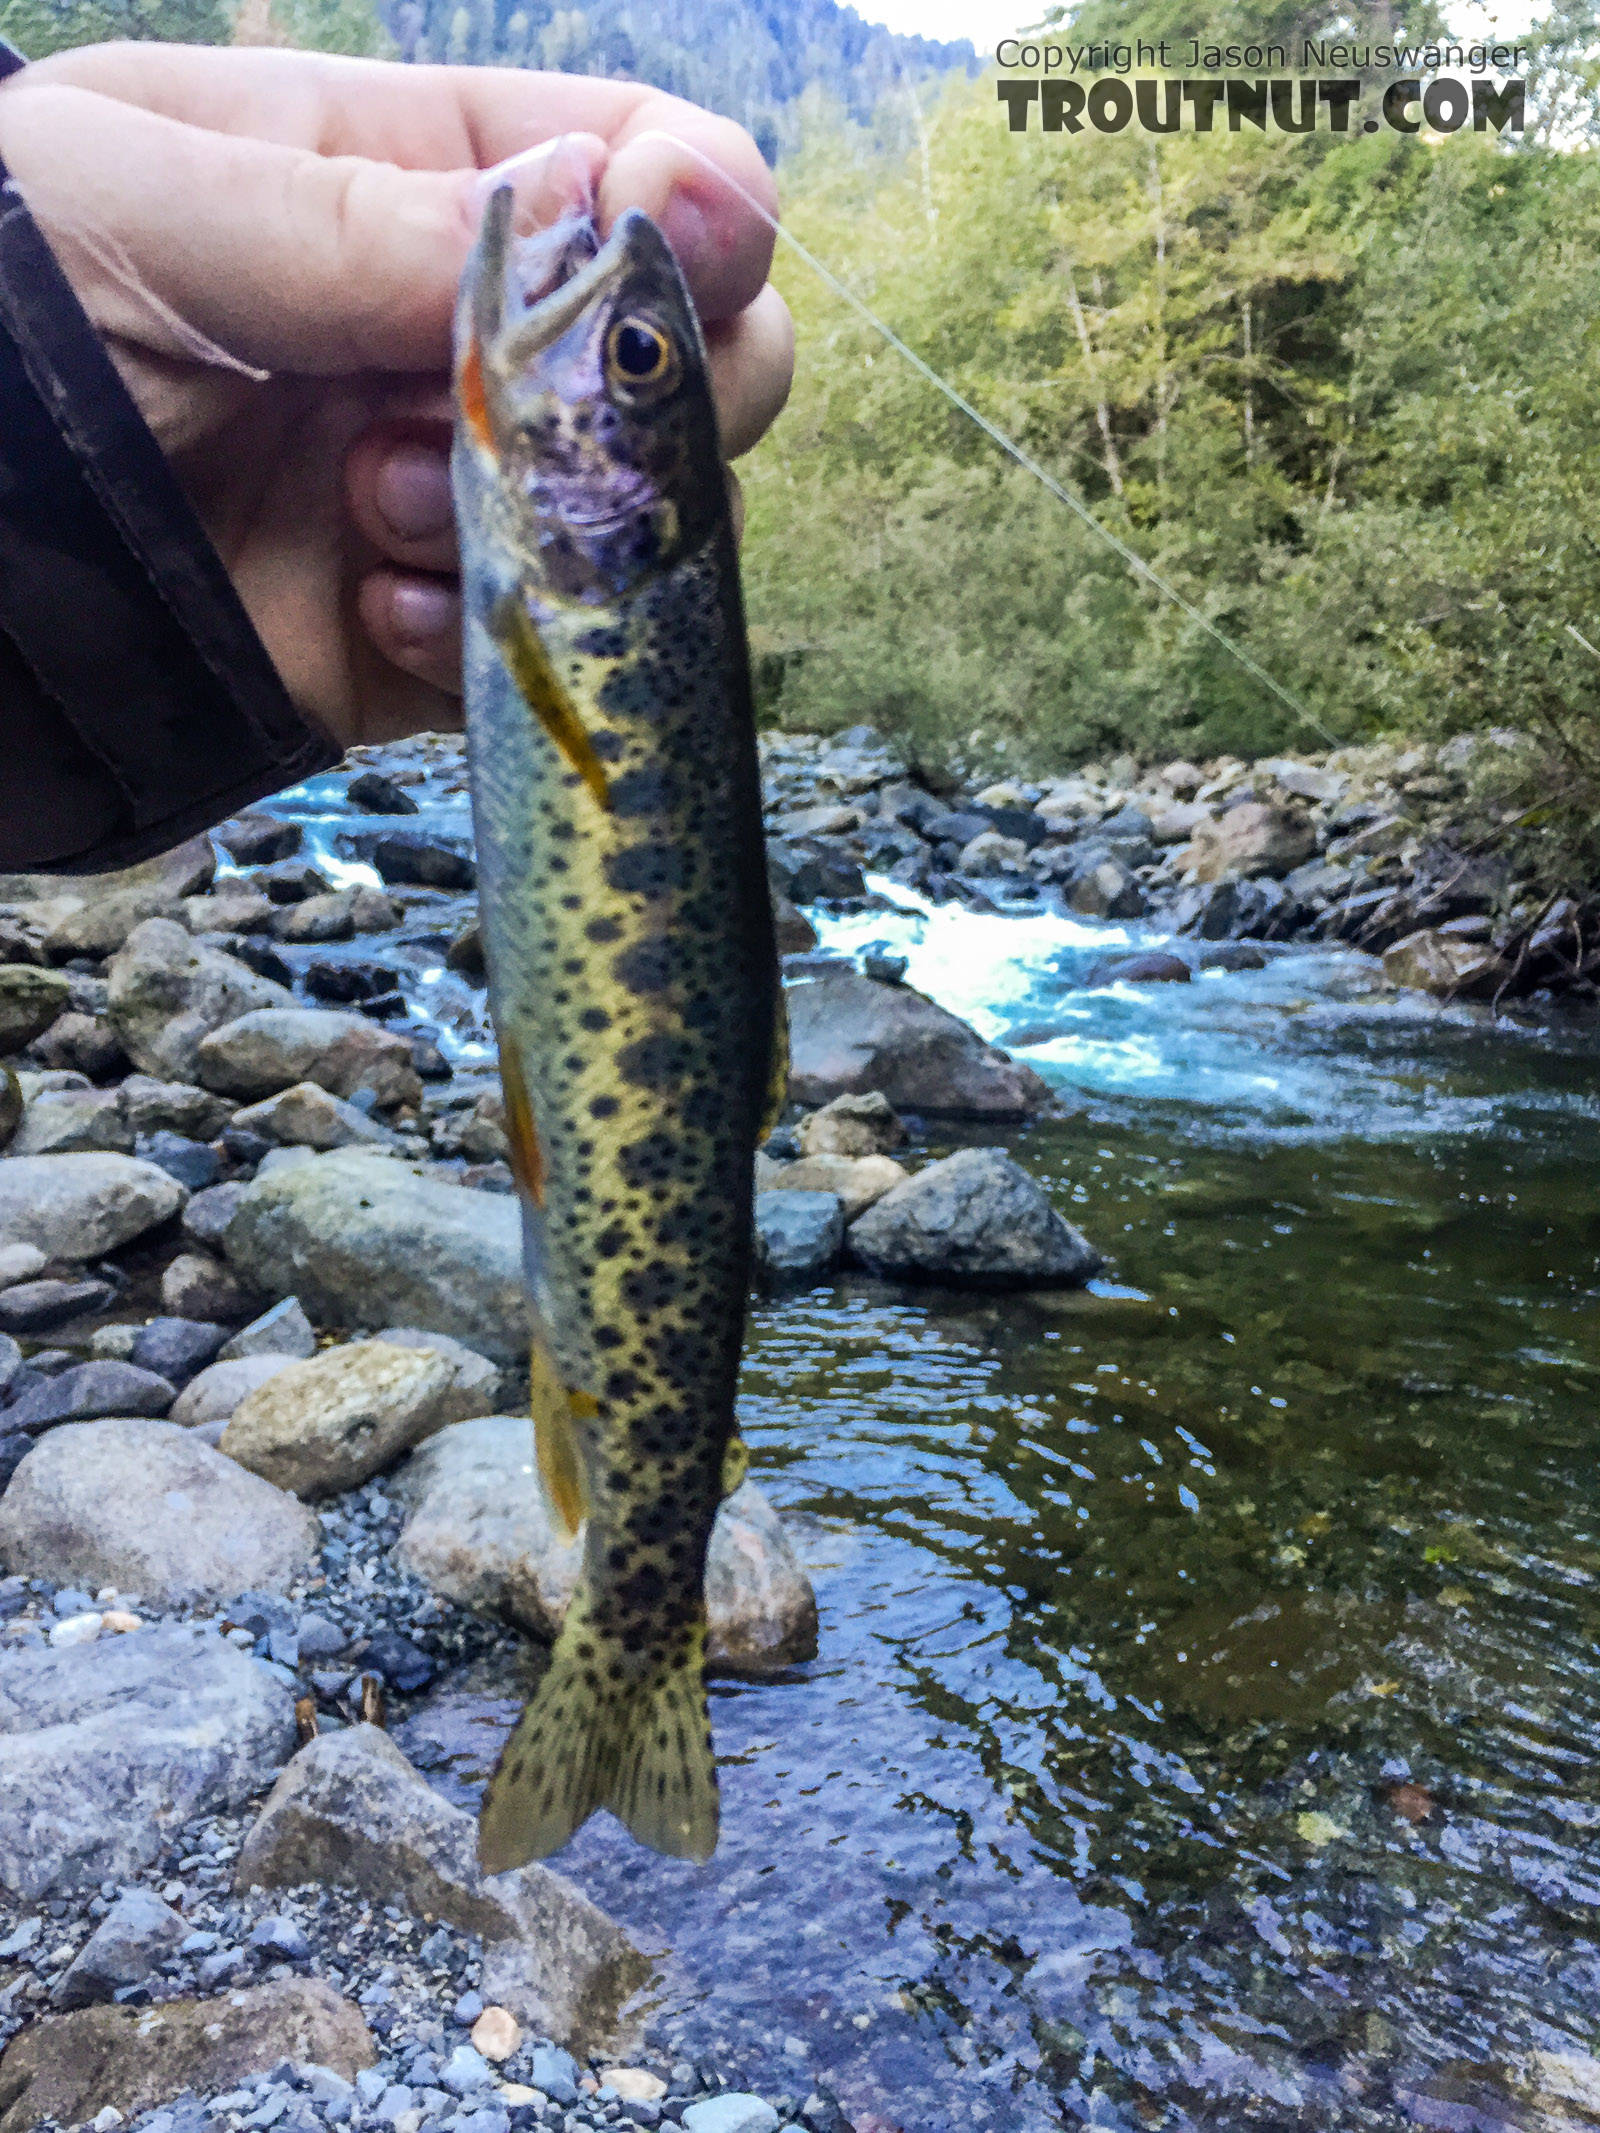  From the Taylor River in Washington.